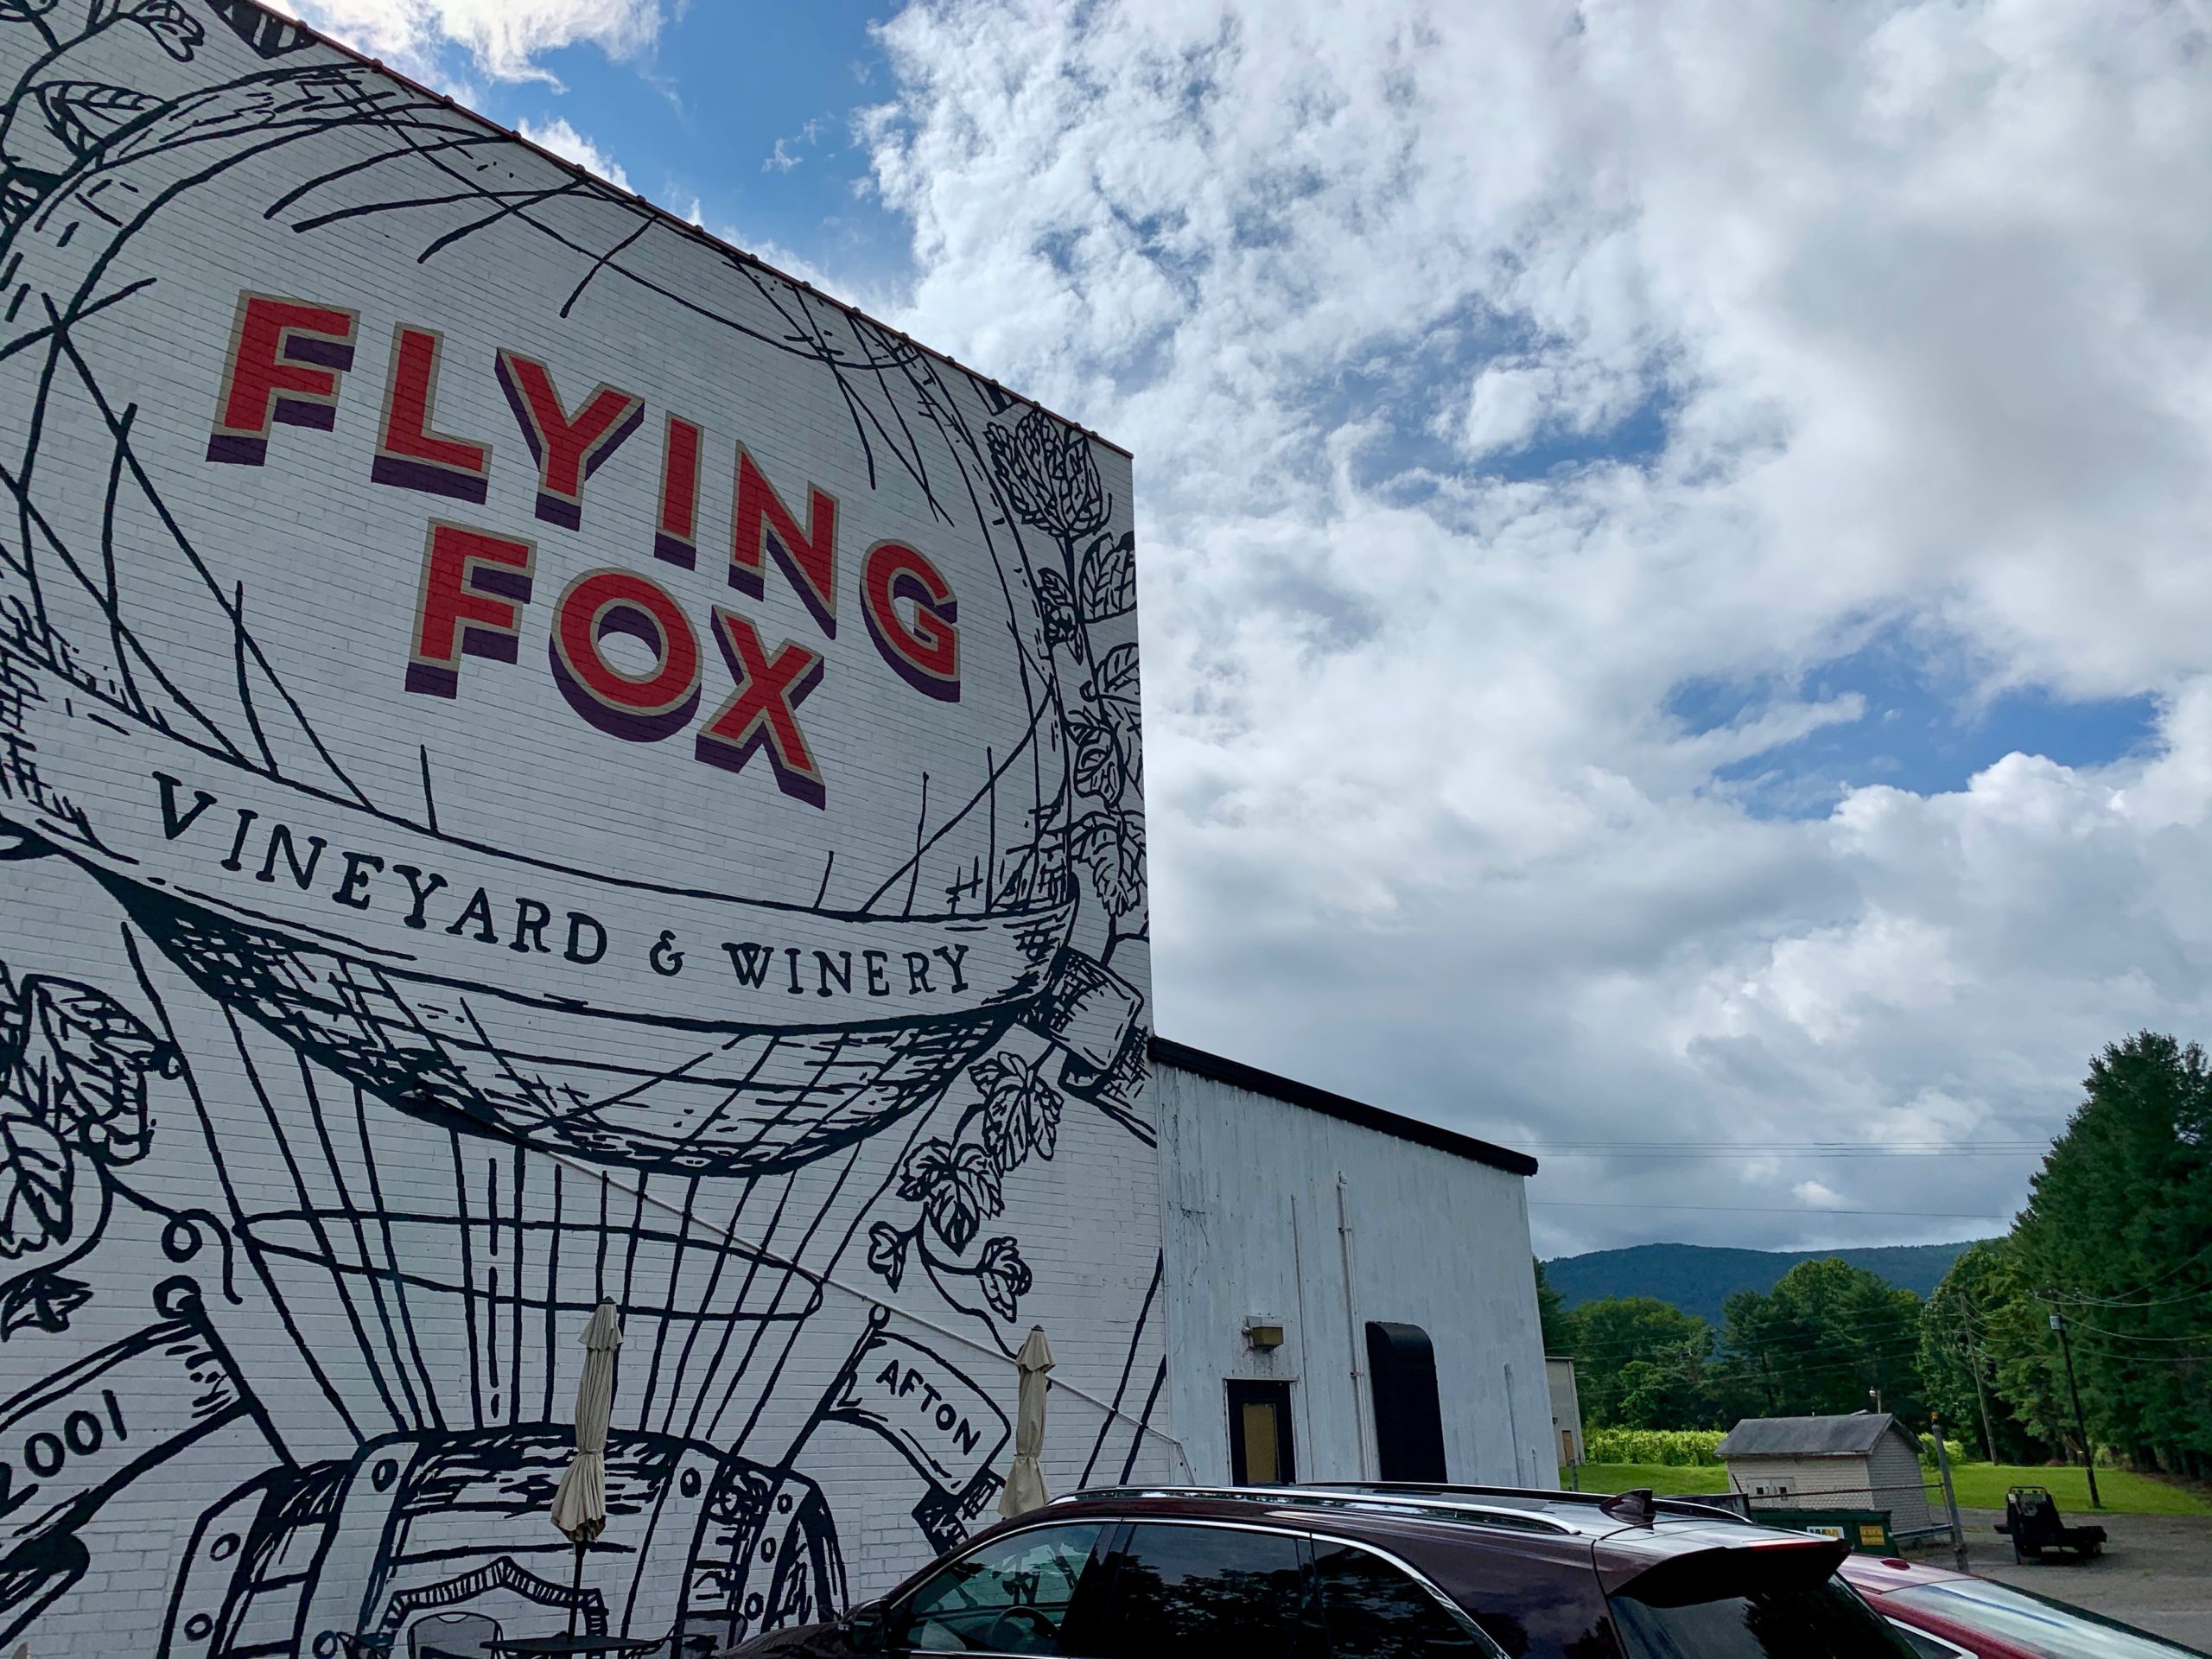 A mural on the facade of the Flying Fox tasting room